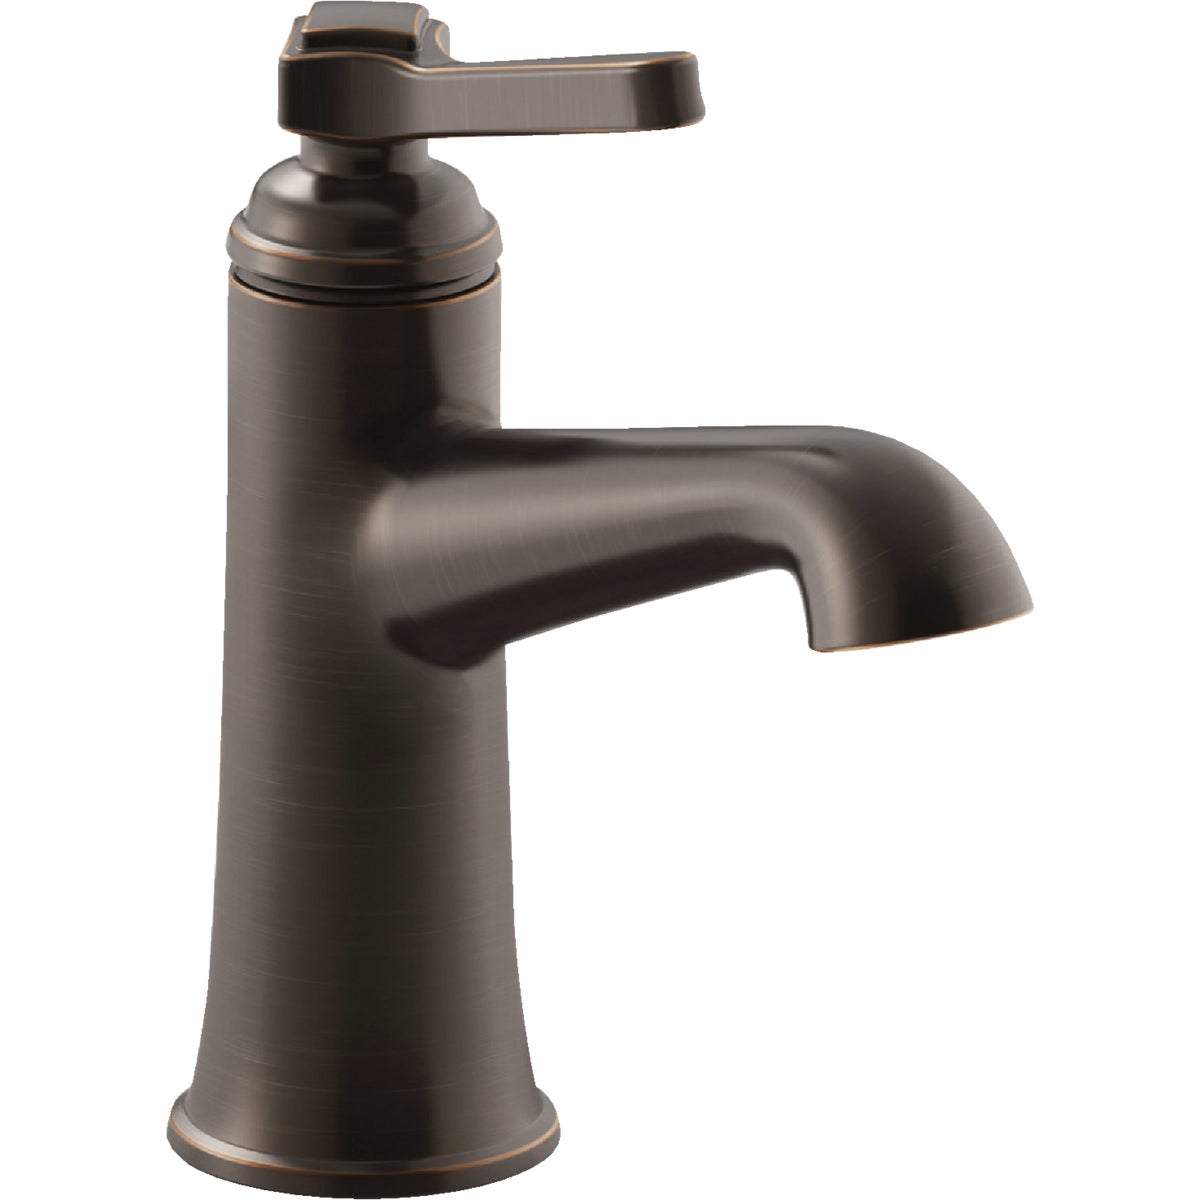 Kohler Georgeson Oil-Rubbed Bronze 1-Handle Lever 4 In. Centerset Bathroom Faucet